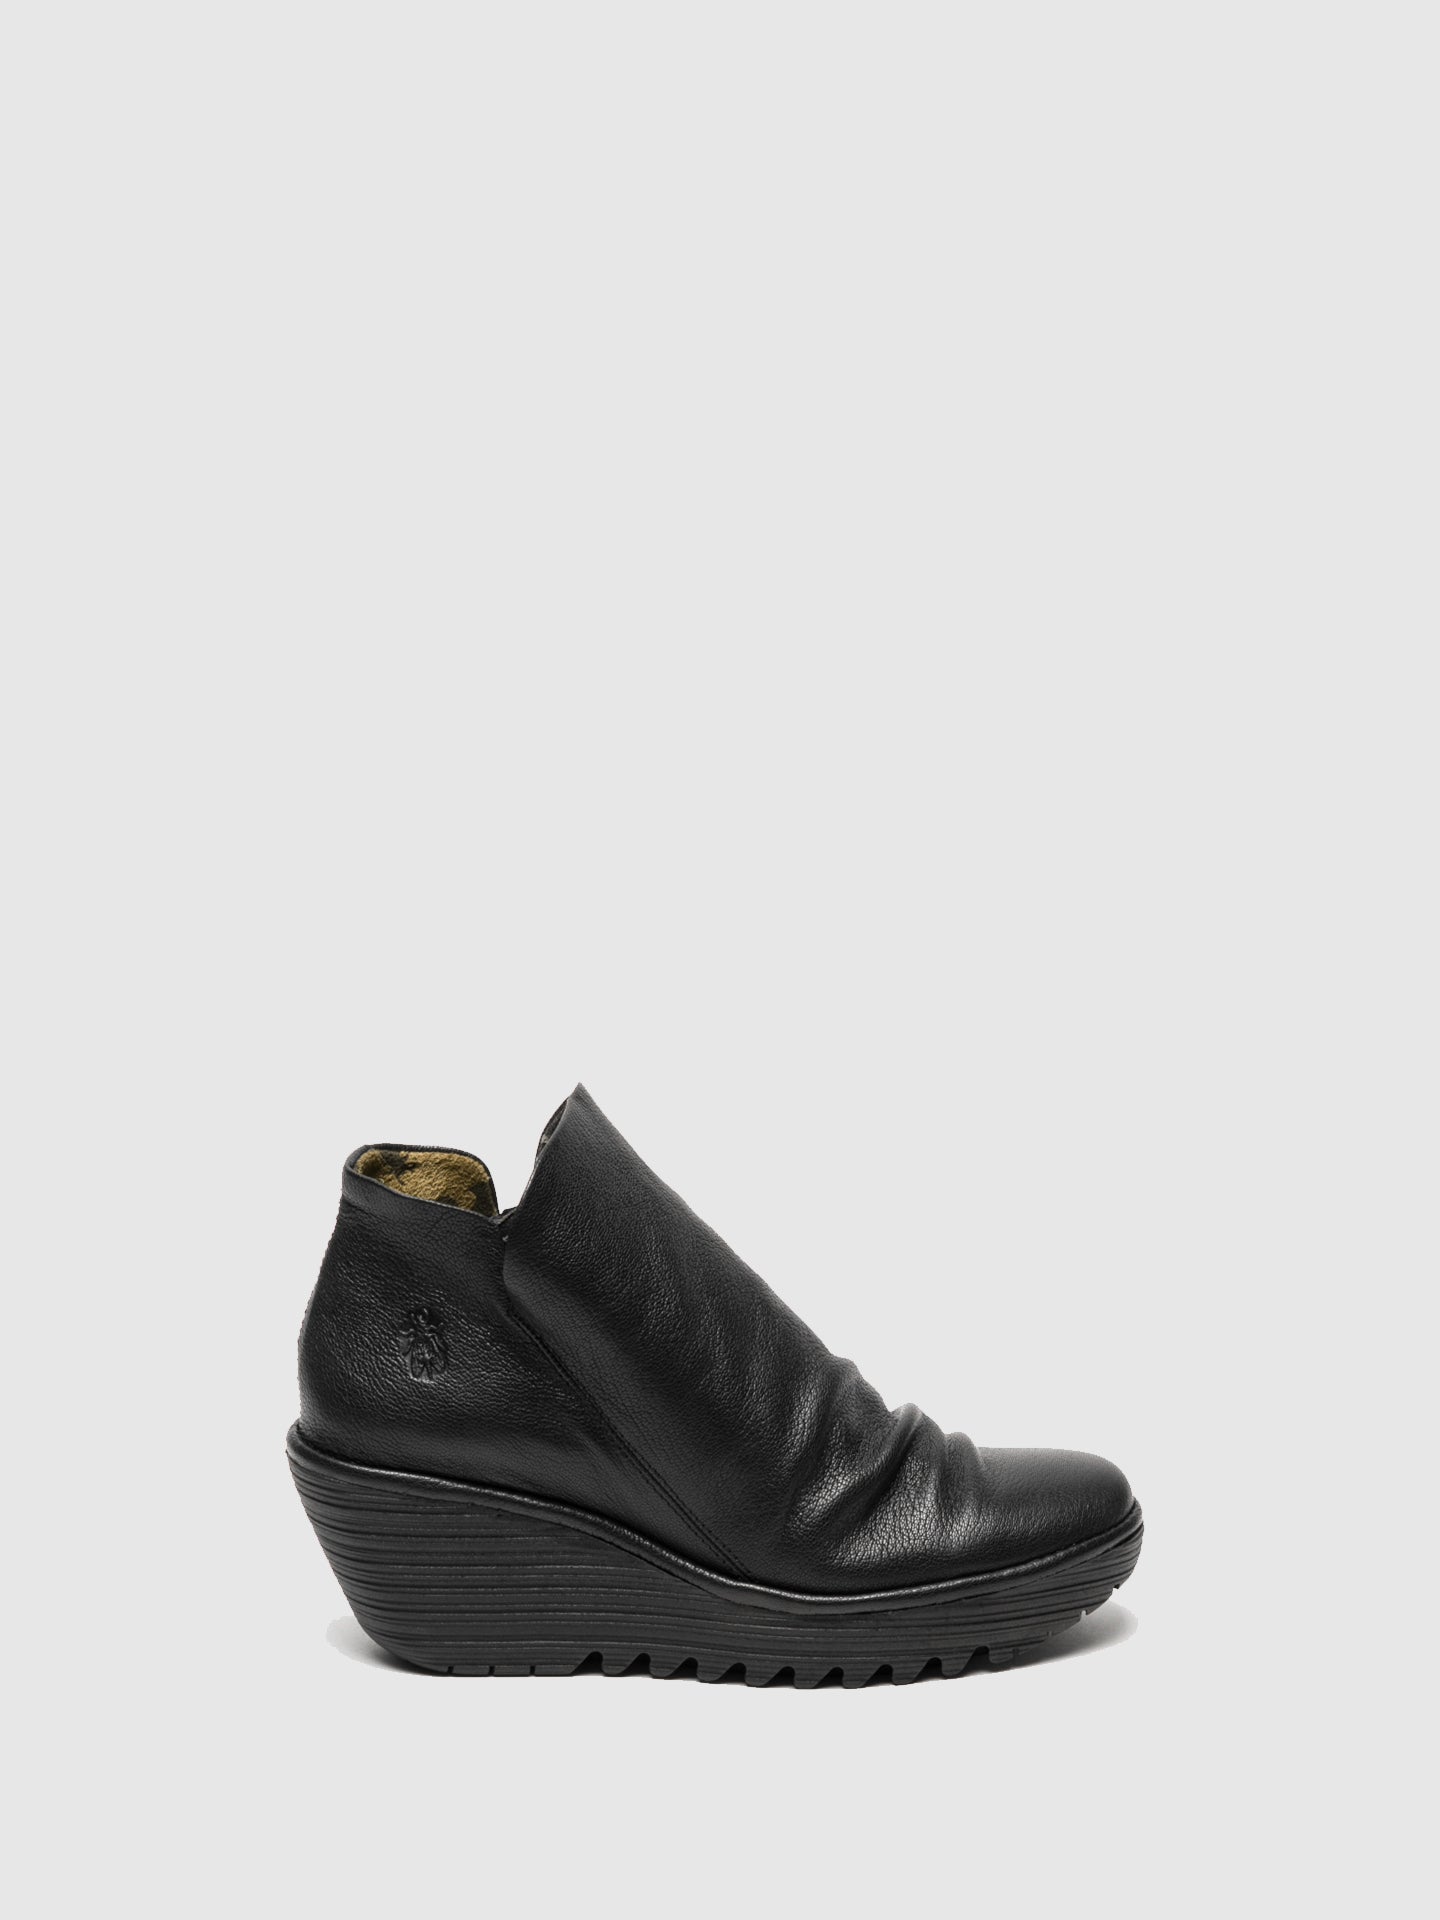 Fly London Matte Black Zip Up Ankle Boots